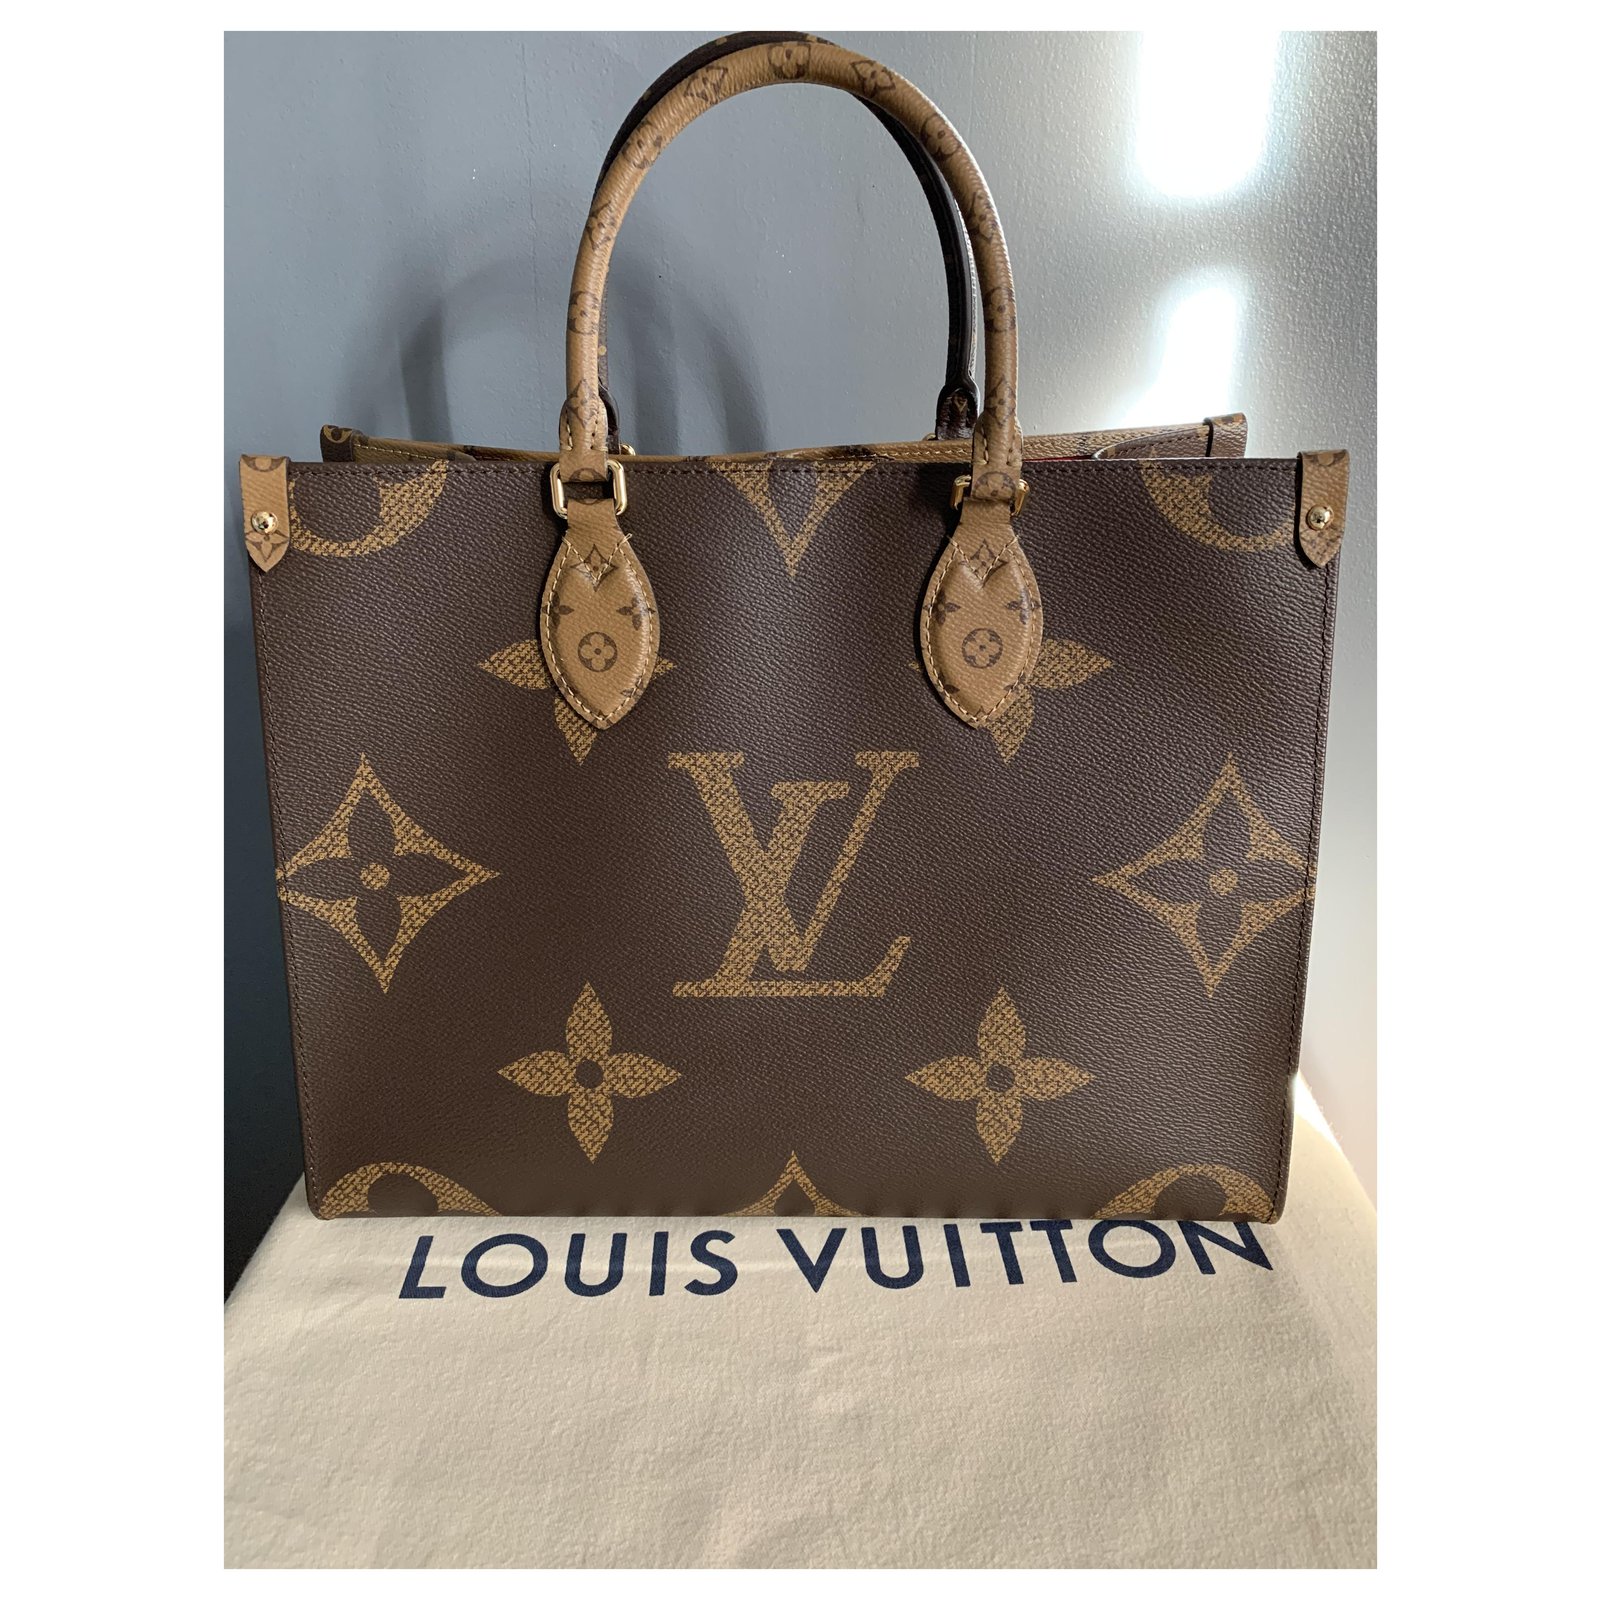 Louis Vuitton - Authenticated Onthego Handbag - Cloth Brown for Women, Never Worn